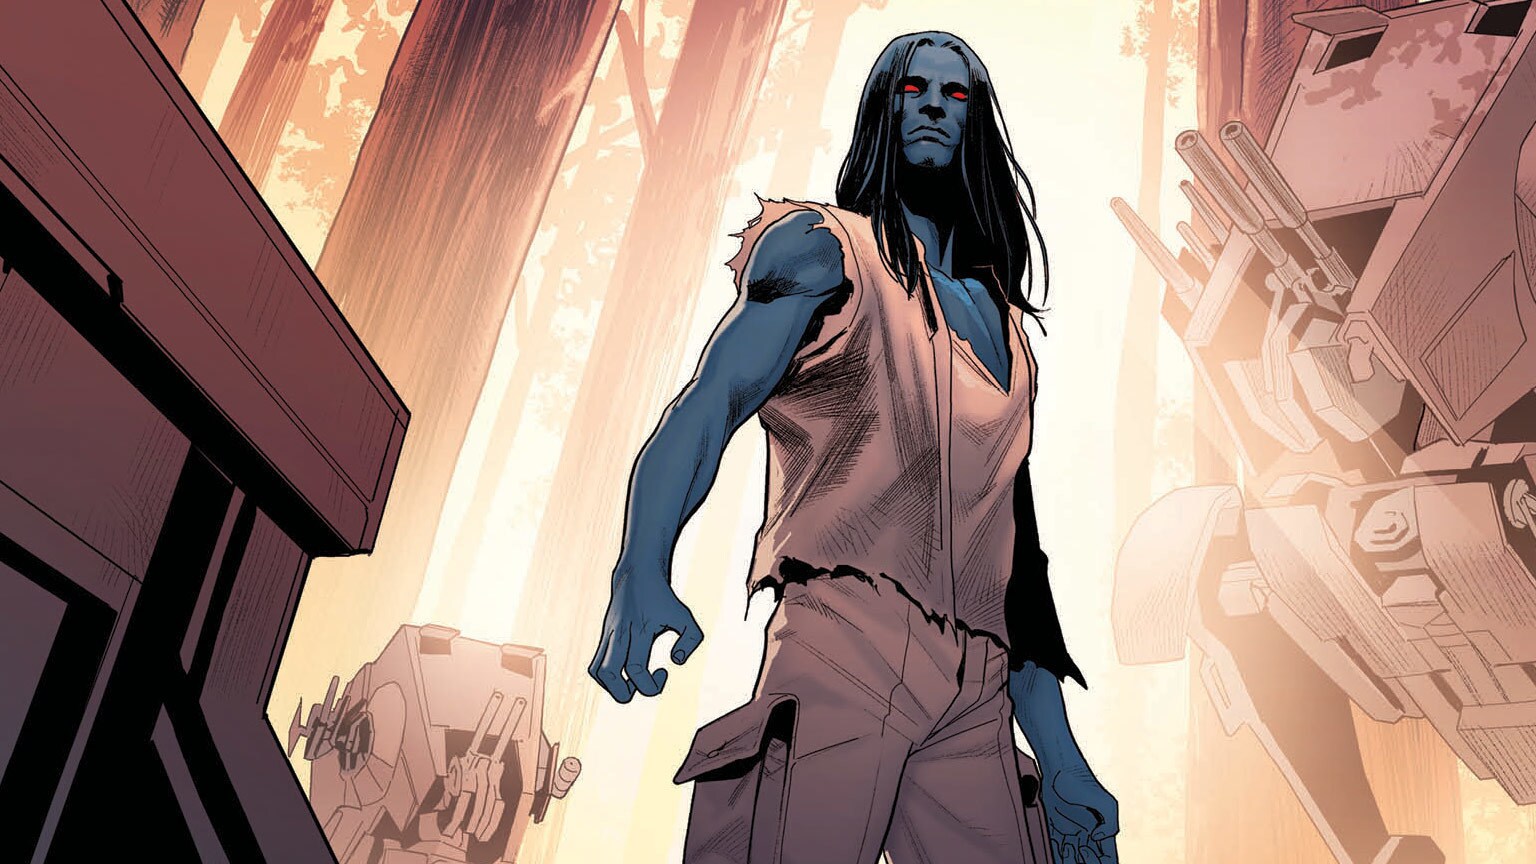 See the Rise of an Imperial Mastermind in Marvel's Thrawn #1 - Exclusive Preview